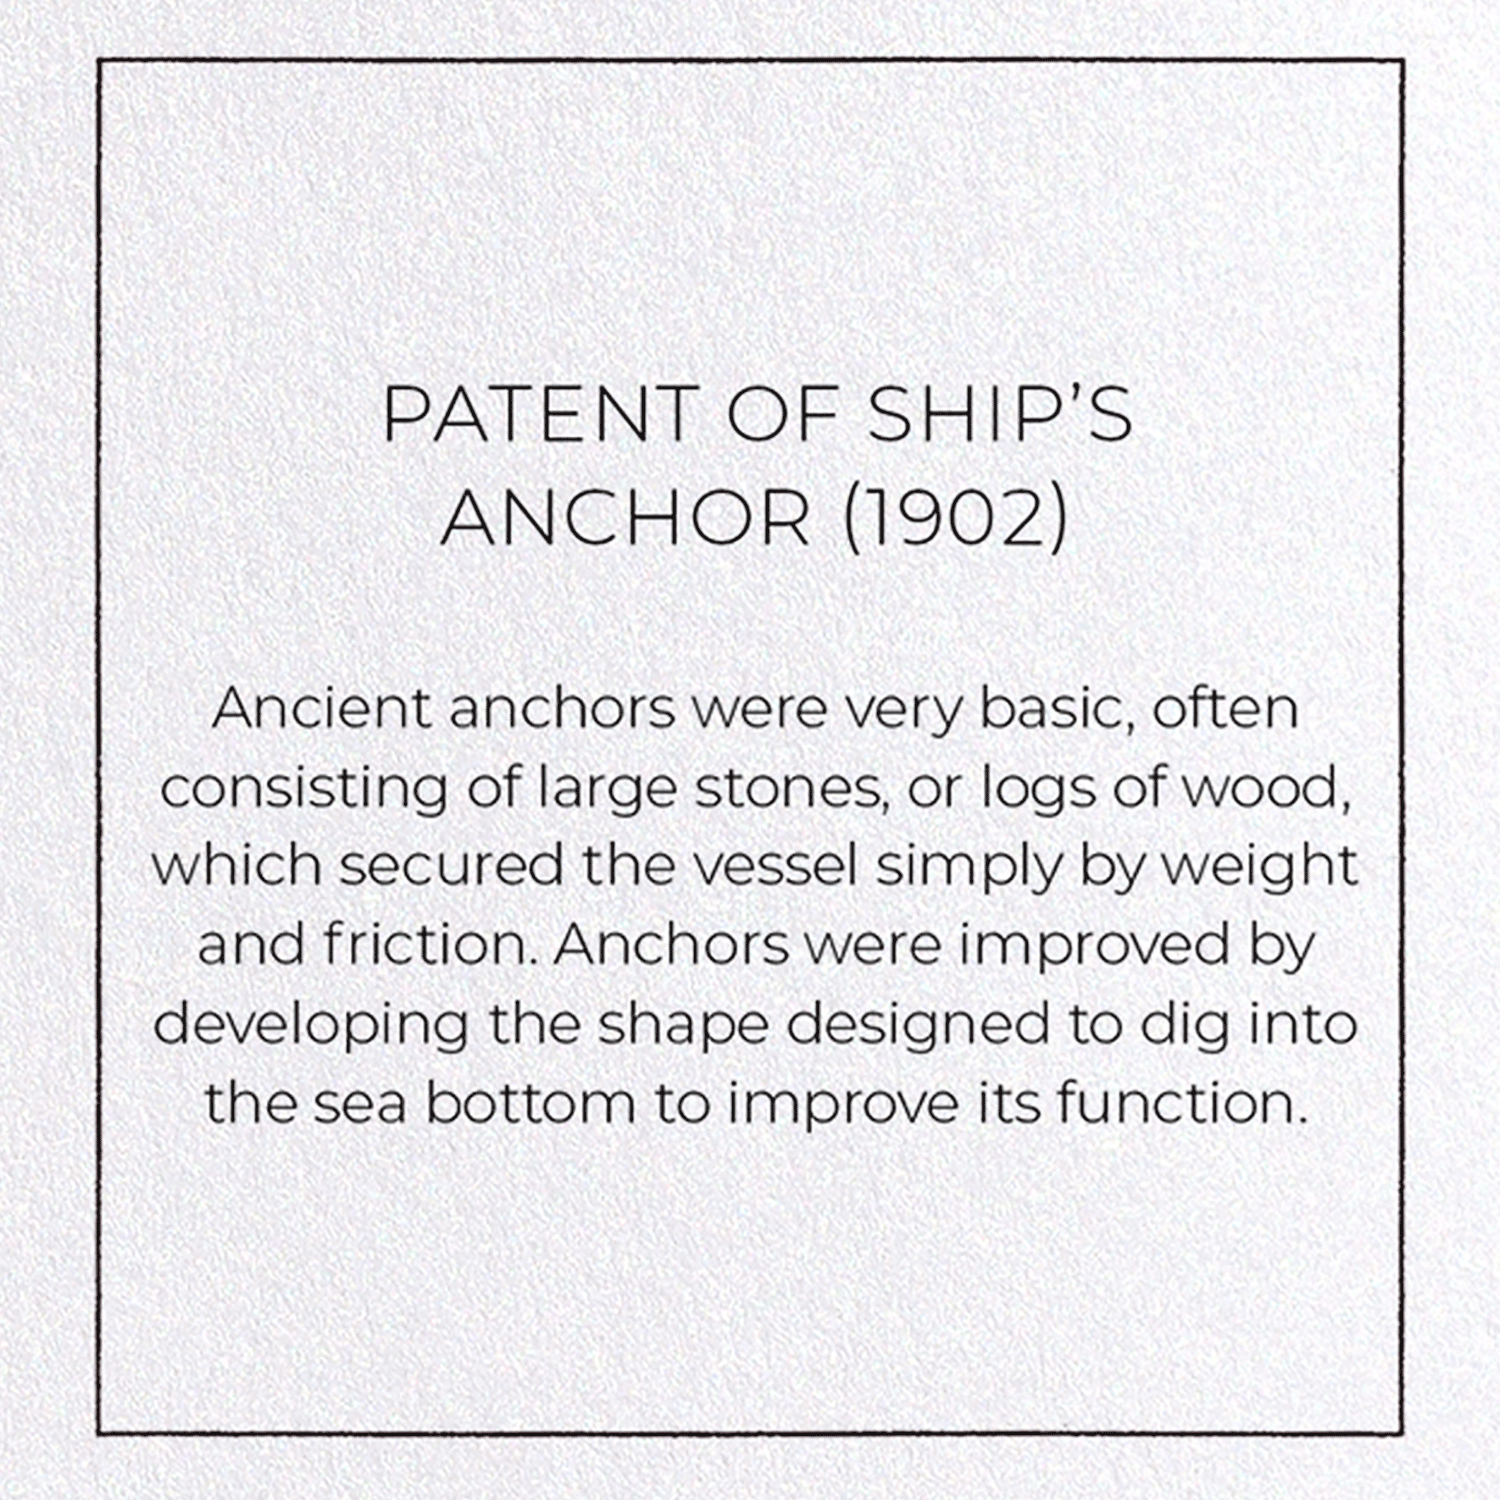 PATENT OF SHIP'S ANCHOR (1902)